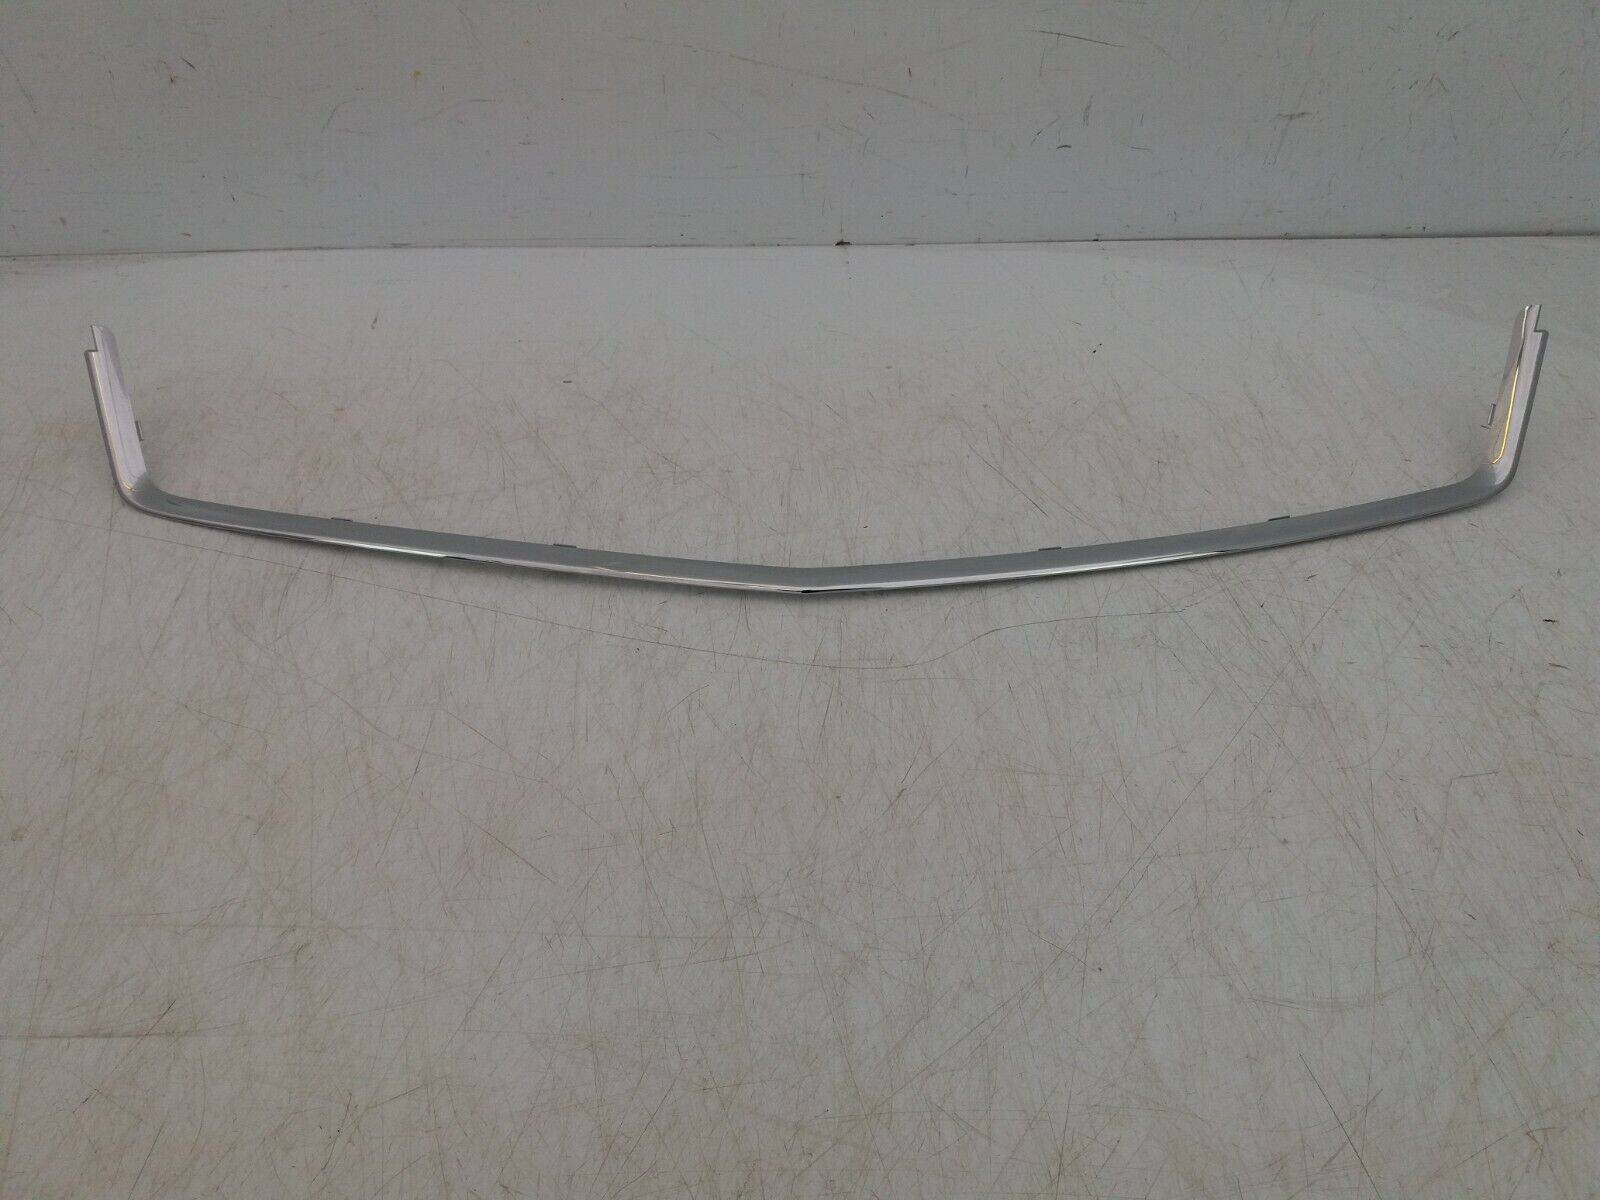 Vauxhall-Astra-H-Front-Bumper-Lower-Chrome-13225795-Genuine-175897457120